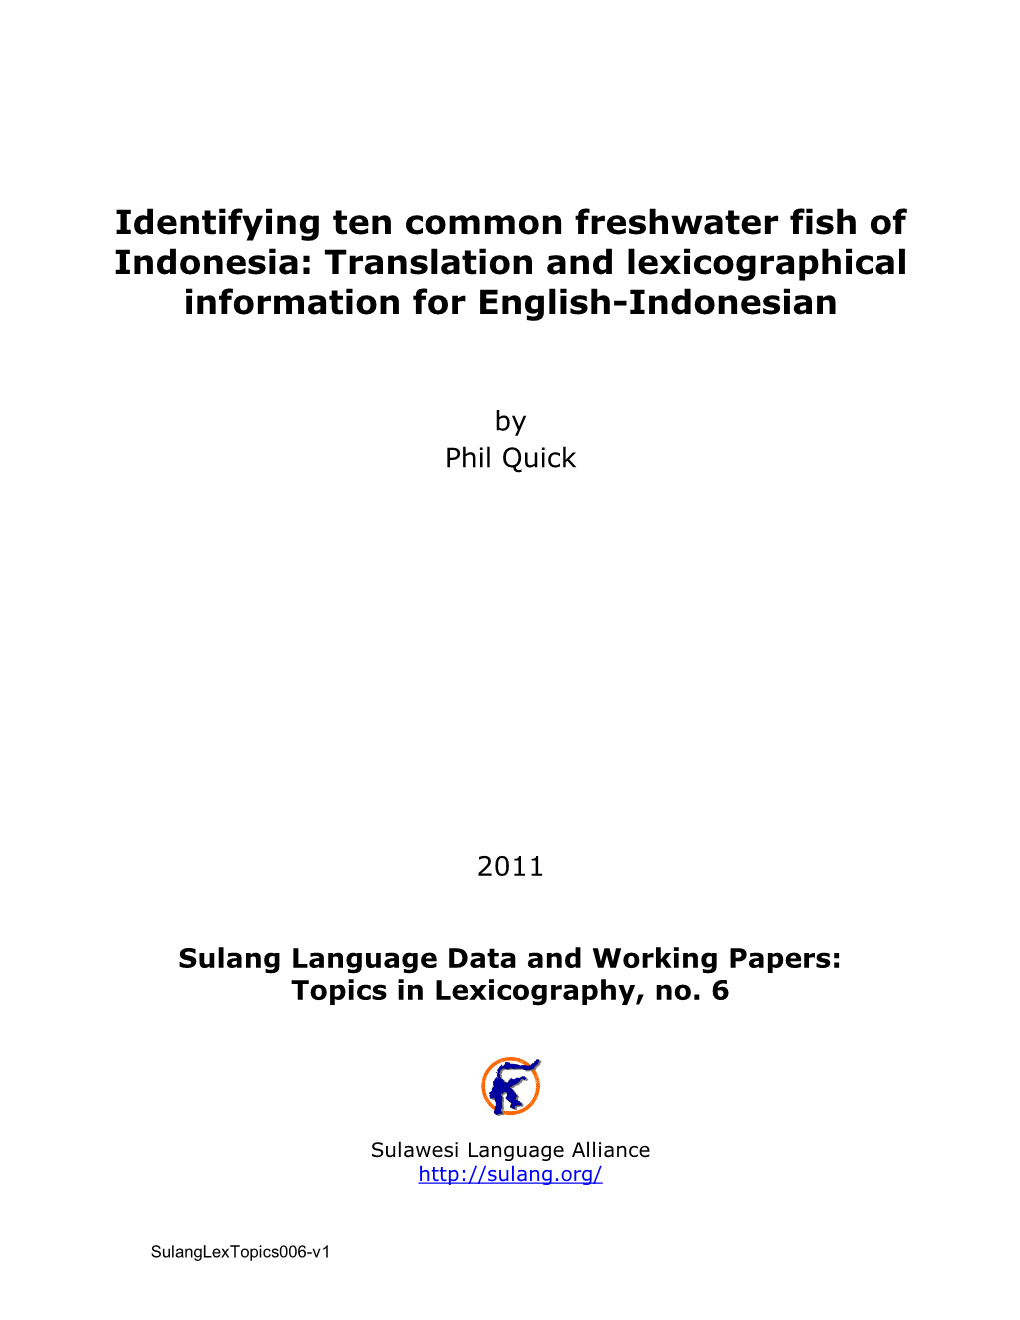 Identifying Ten Common Freshwater Fish of Indonesia: Translation and Lexicographical Information for English-Indonesian